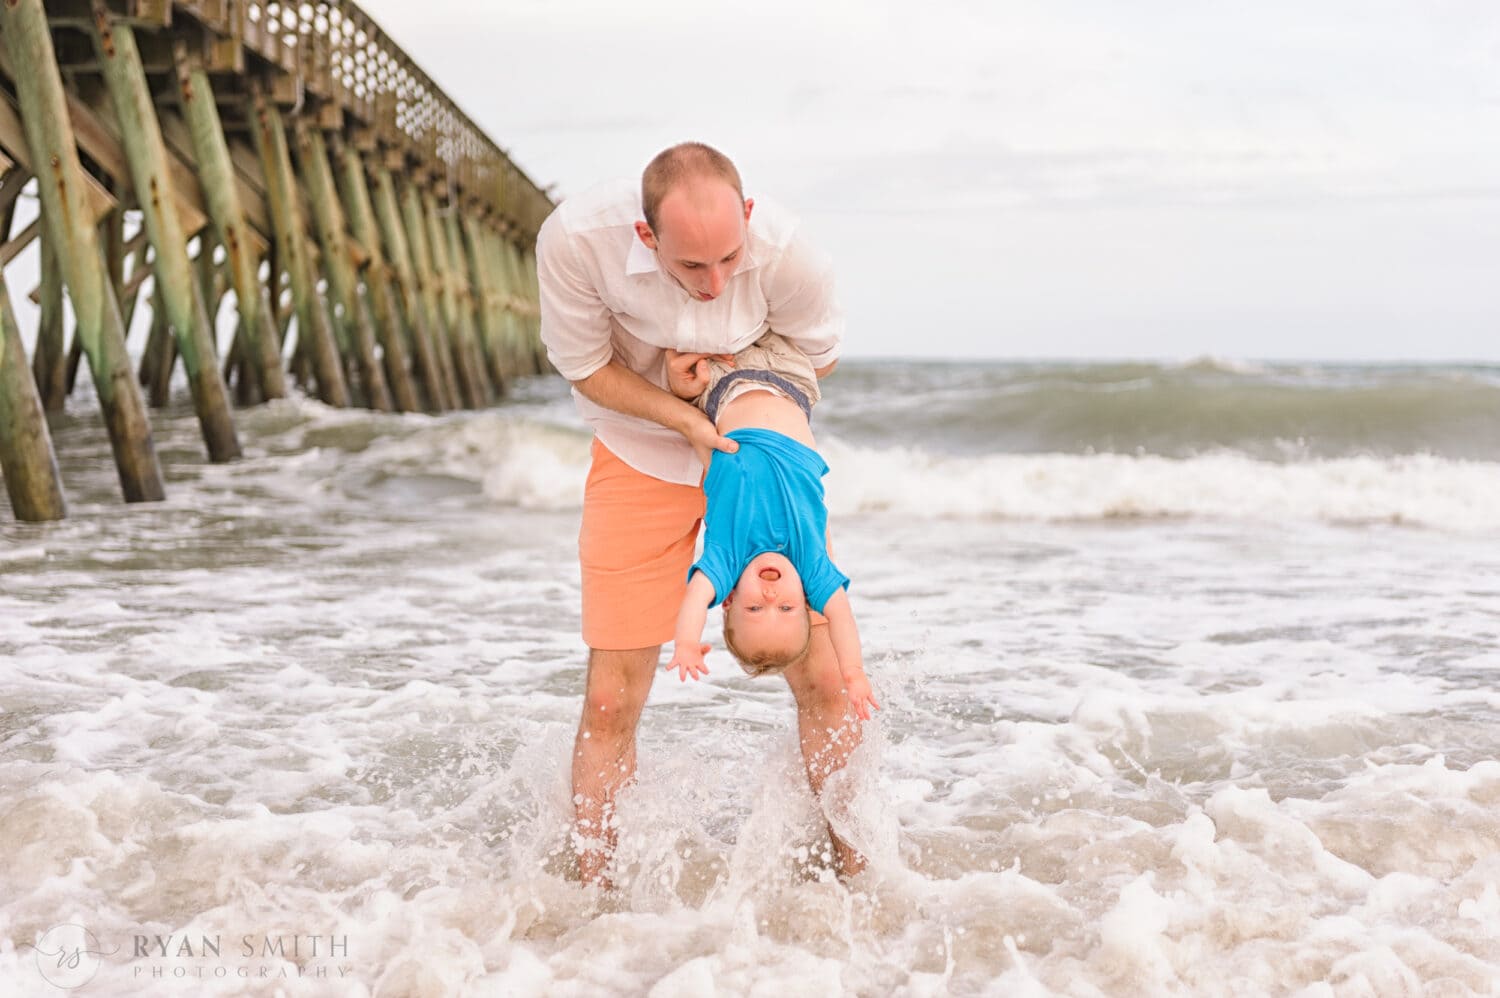 Having fun with his uncle holding him upside down - Myrtle Beach State Park